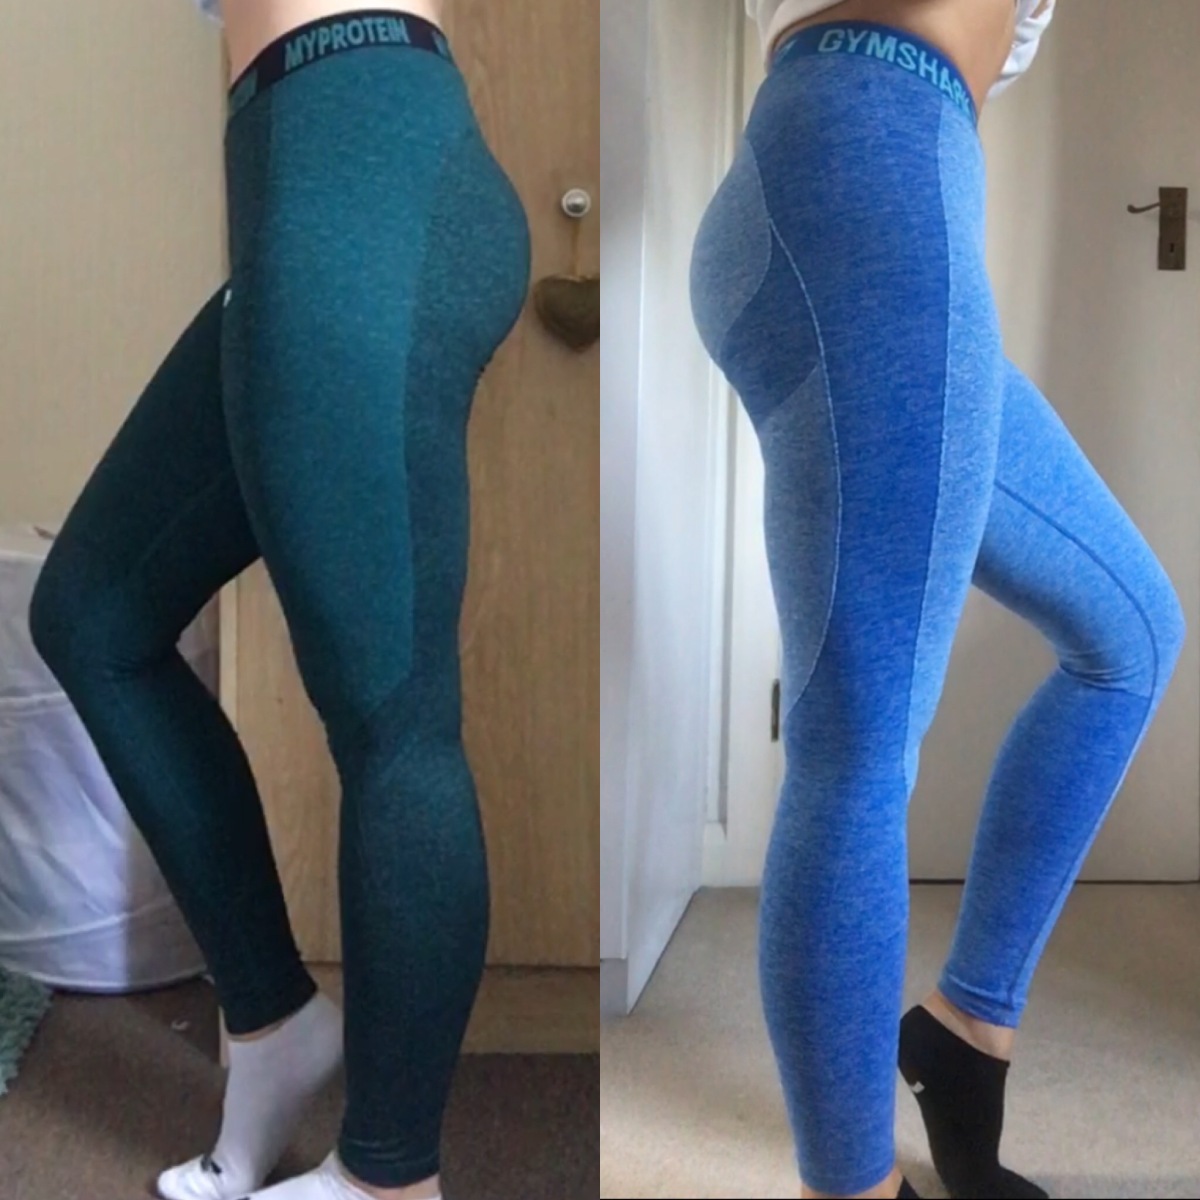 Affordable Gymshark dupes!?- MyProtein review! 